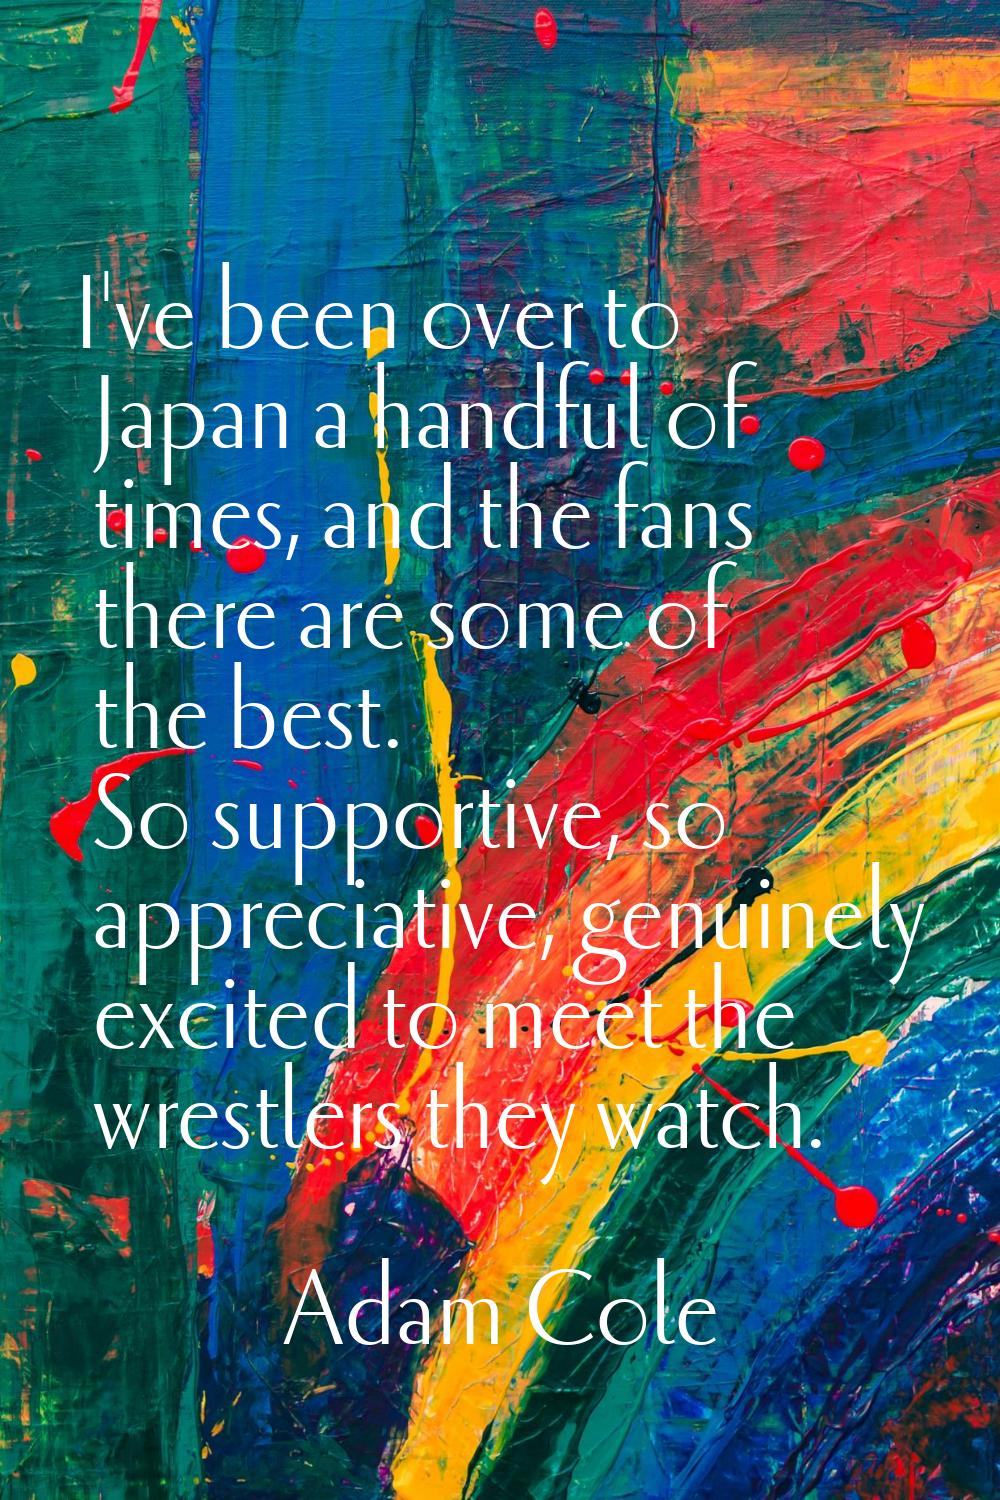 I've been over to Japan a handful of times, and the fans there are some of the best. So supportive,